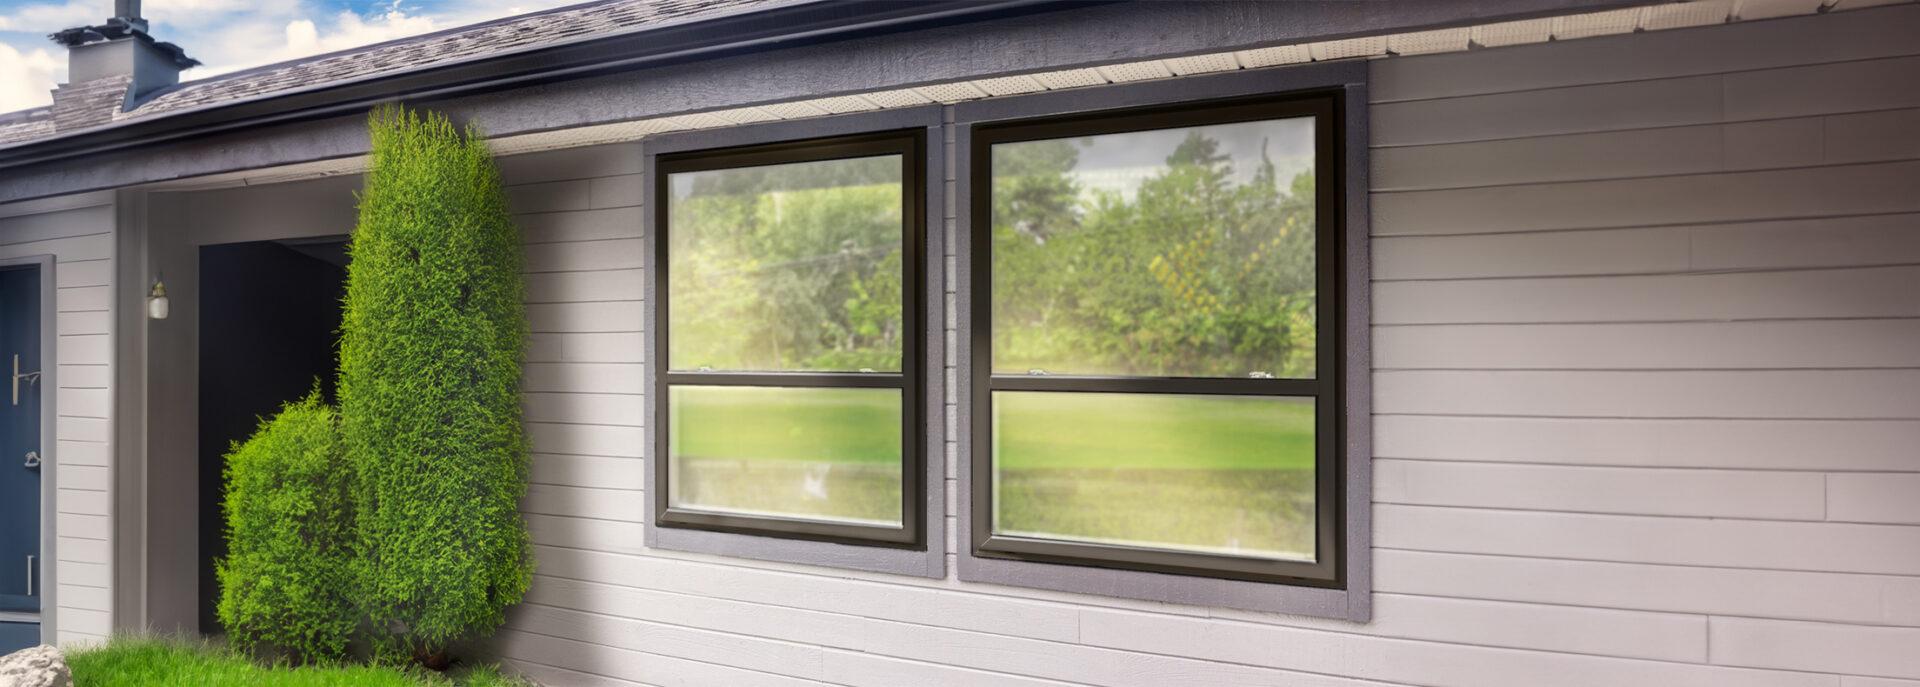 black hung windows in home